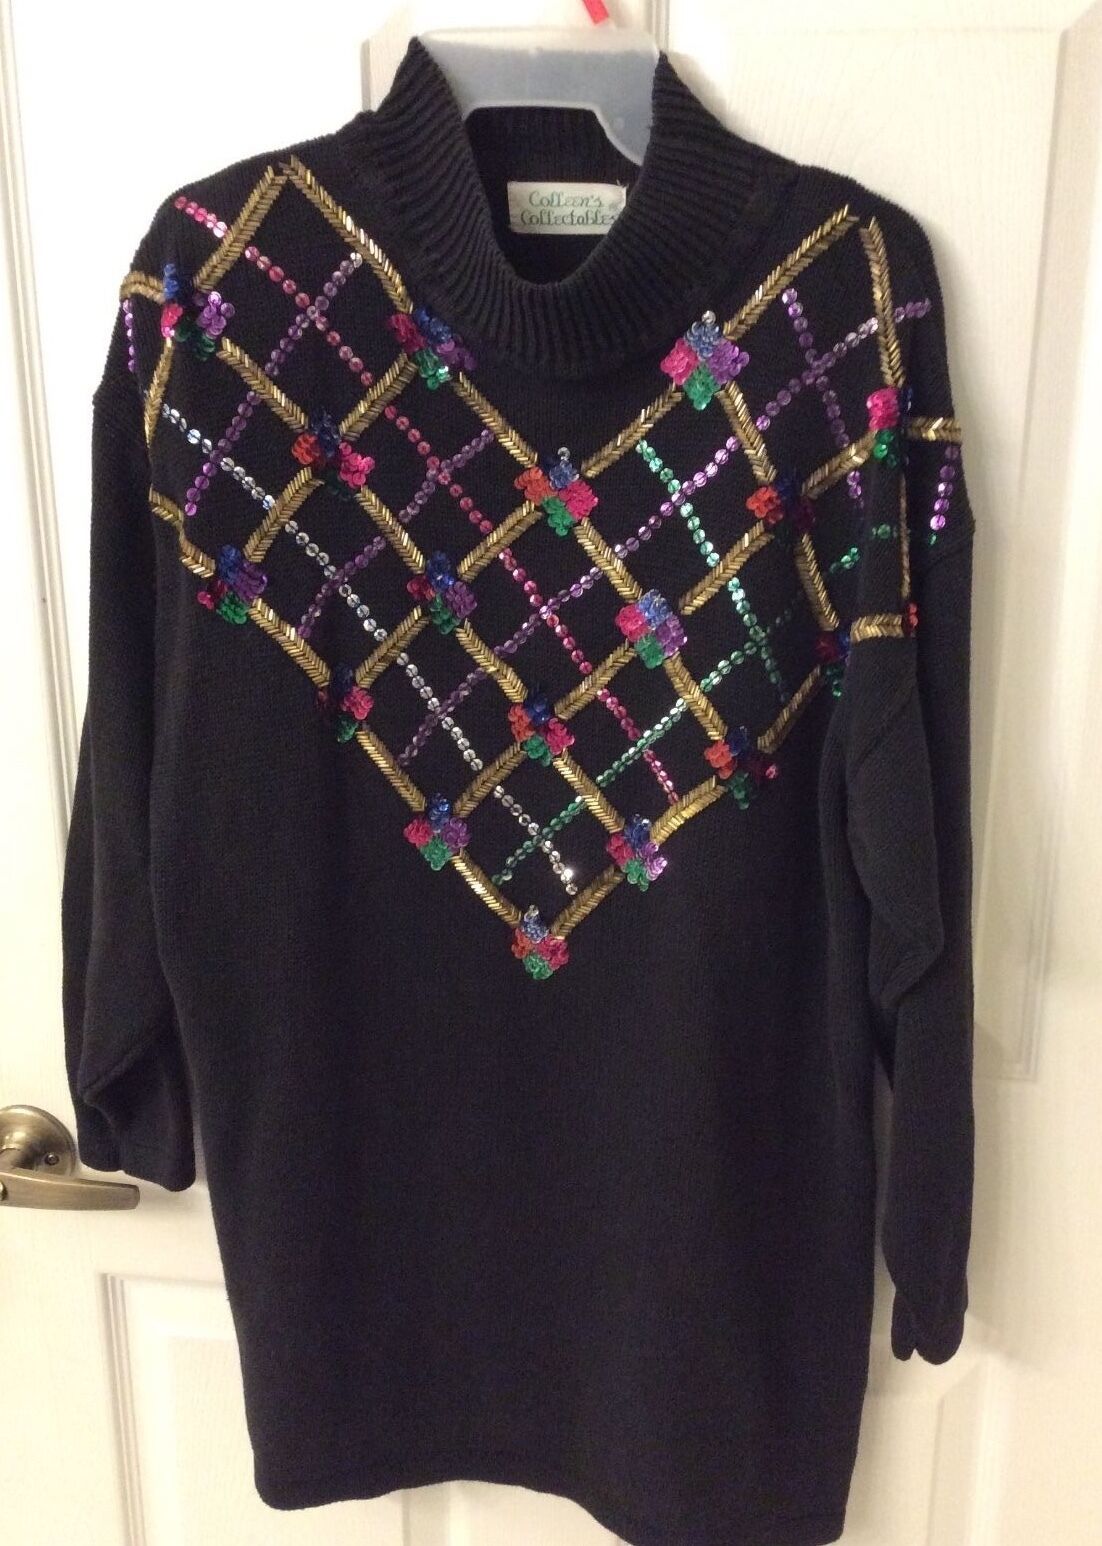 Primary image for Colleen's Collectables Sweater Sequins Vintage Party Heavy Sweater  SZ L